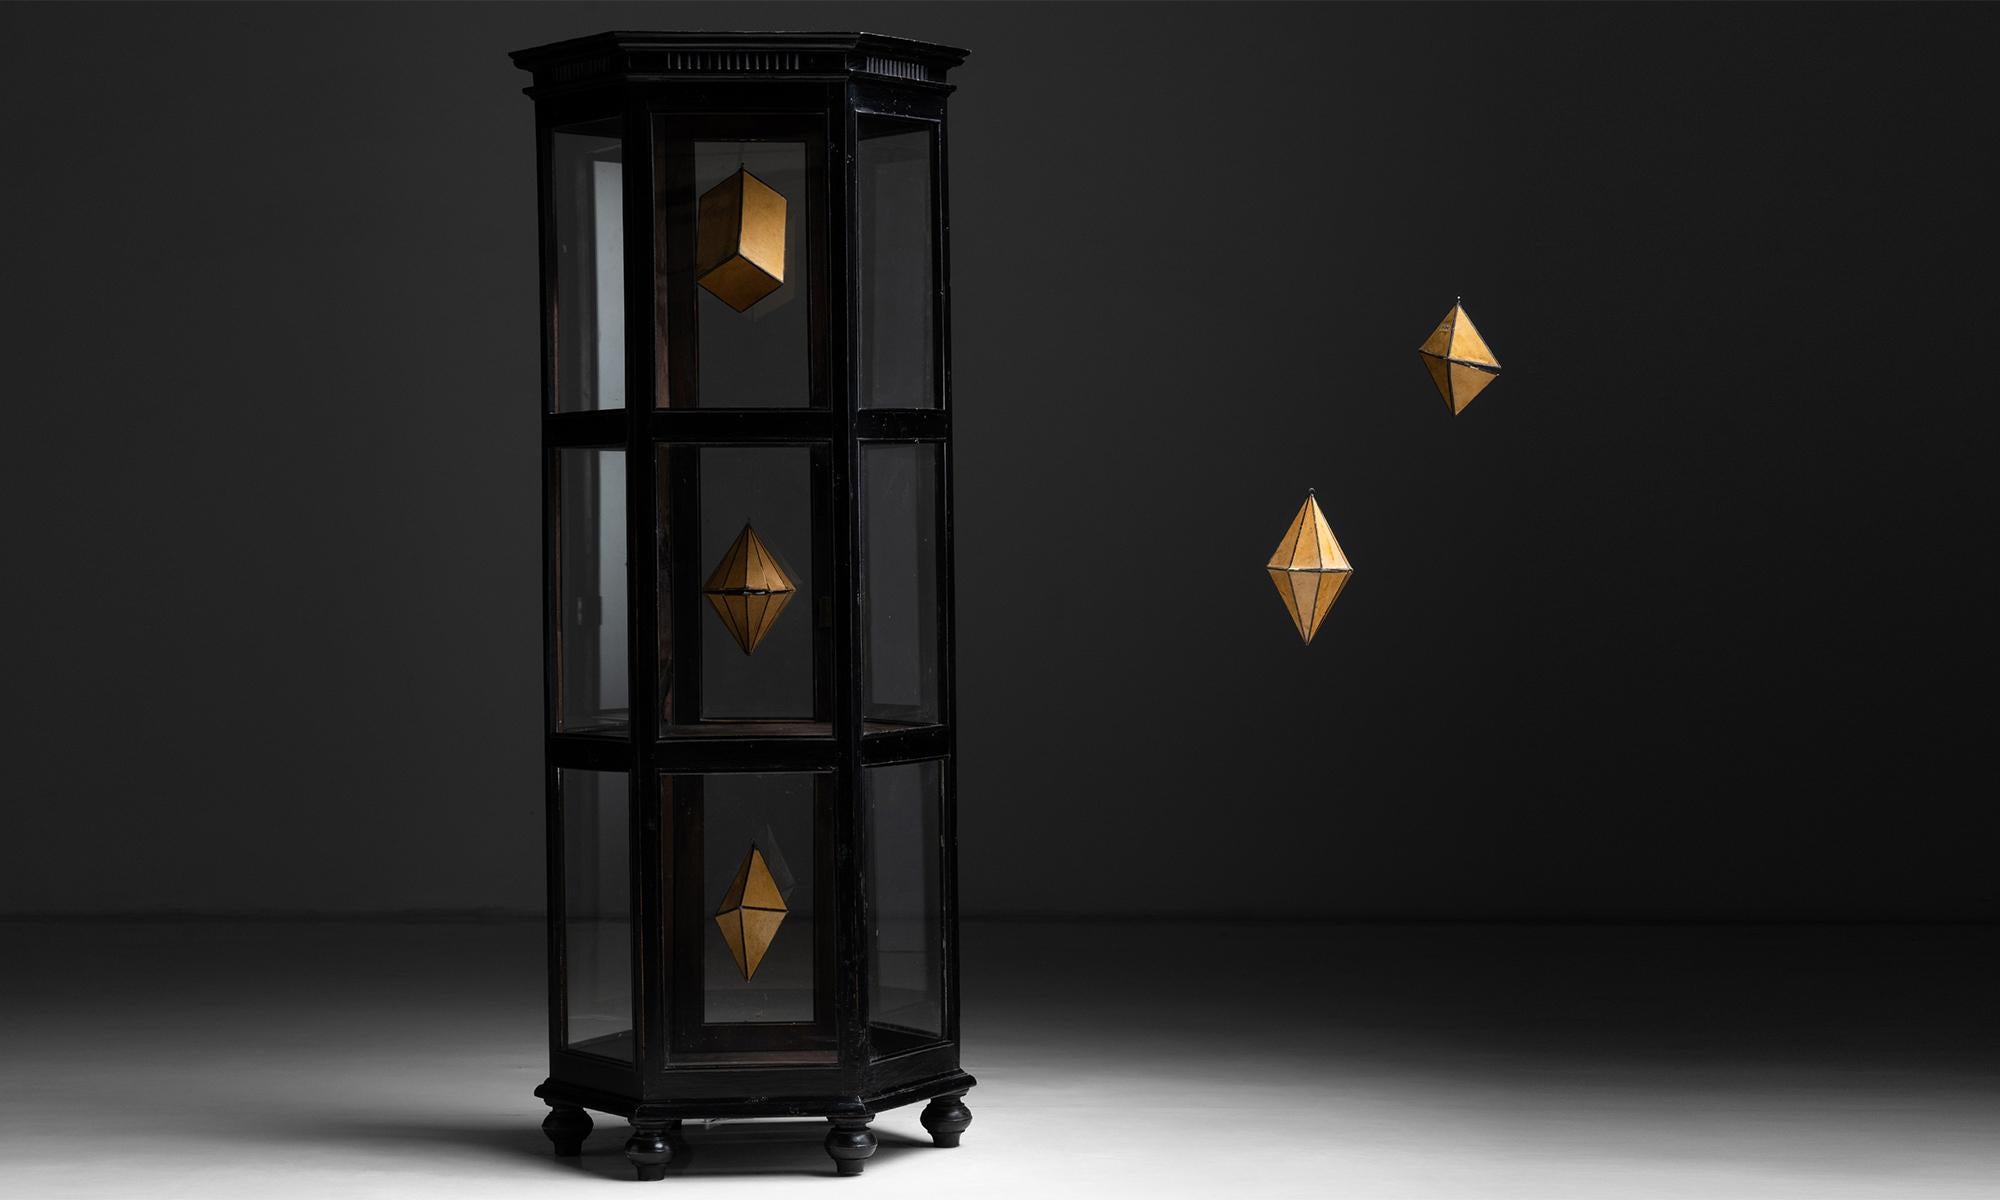 Hexagonal Display Cabinet, England, circa 1910

Tiered shelving display case with ebonised wood and key included

Measures 29”w x 24.75”d x 69.25”h.